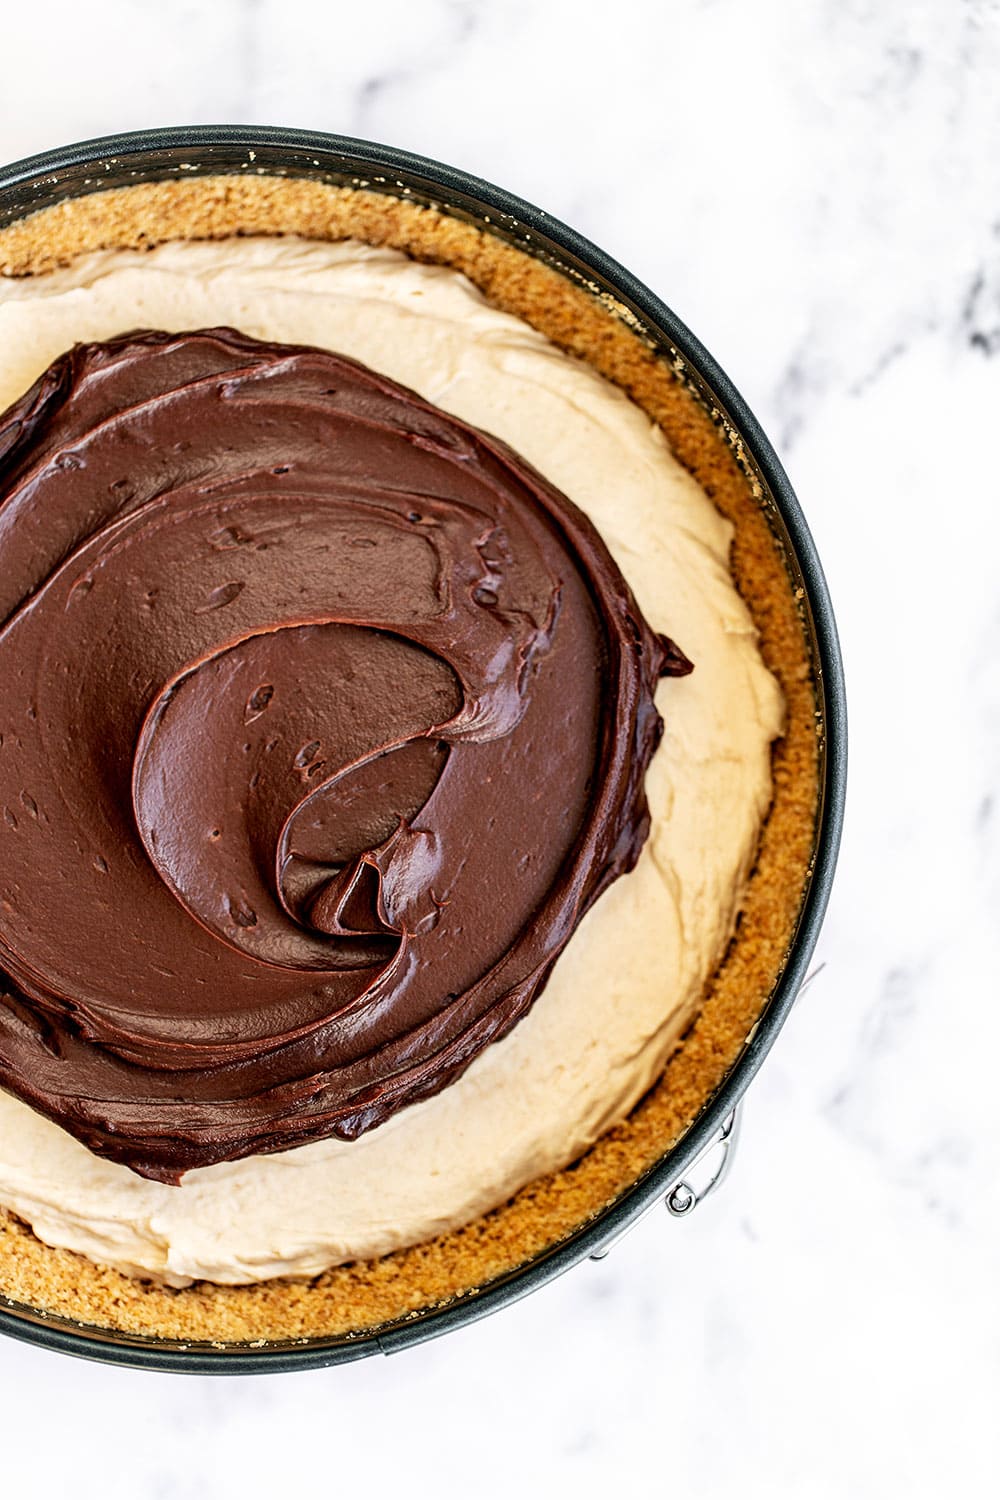 Top of entire no-bake peanut butter cheesecake with chocolate ganache spread over